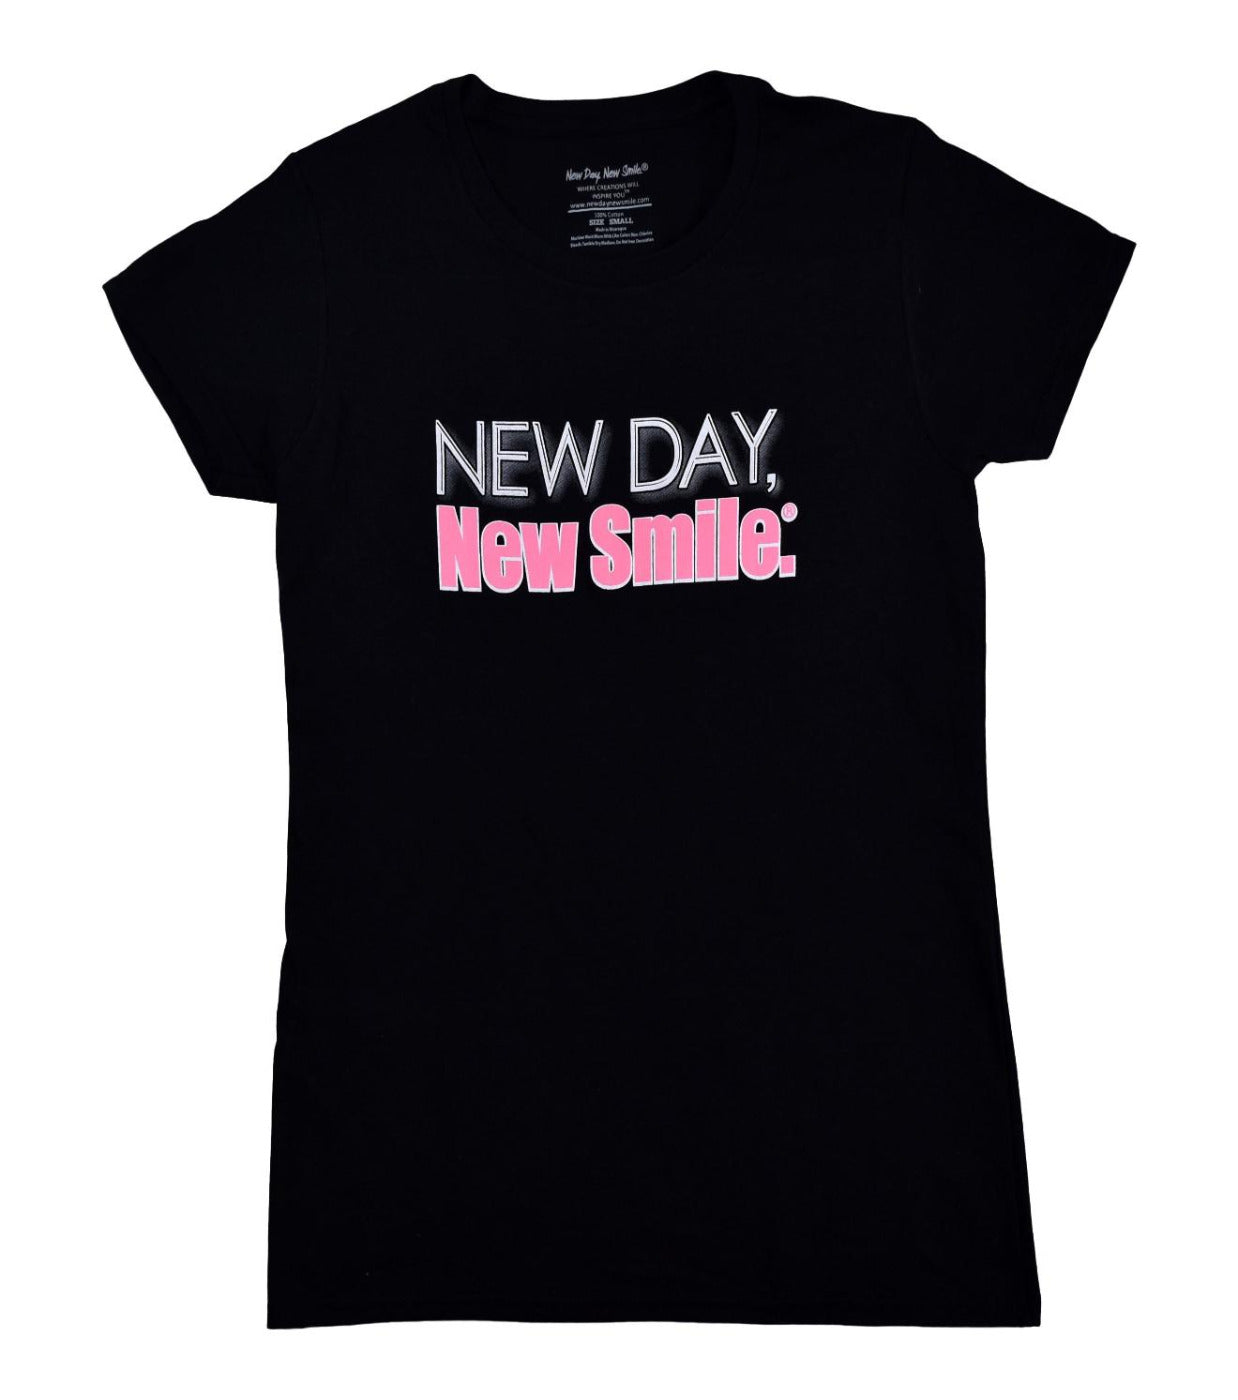 New Day New Smile Women's Black Tee available at NewDayNewSmile.com